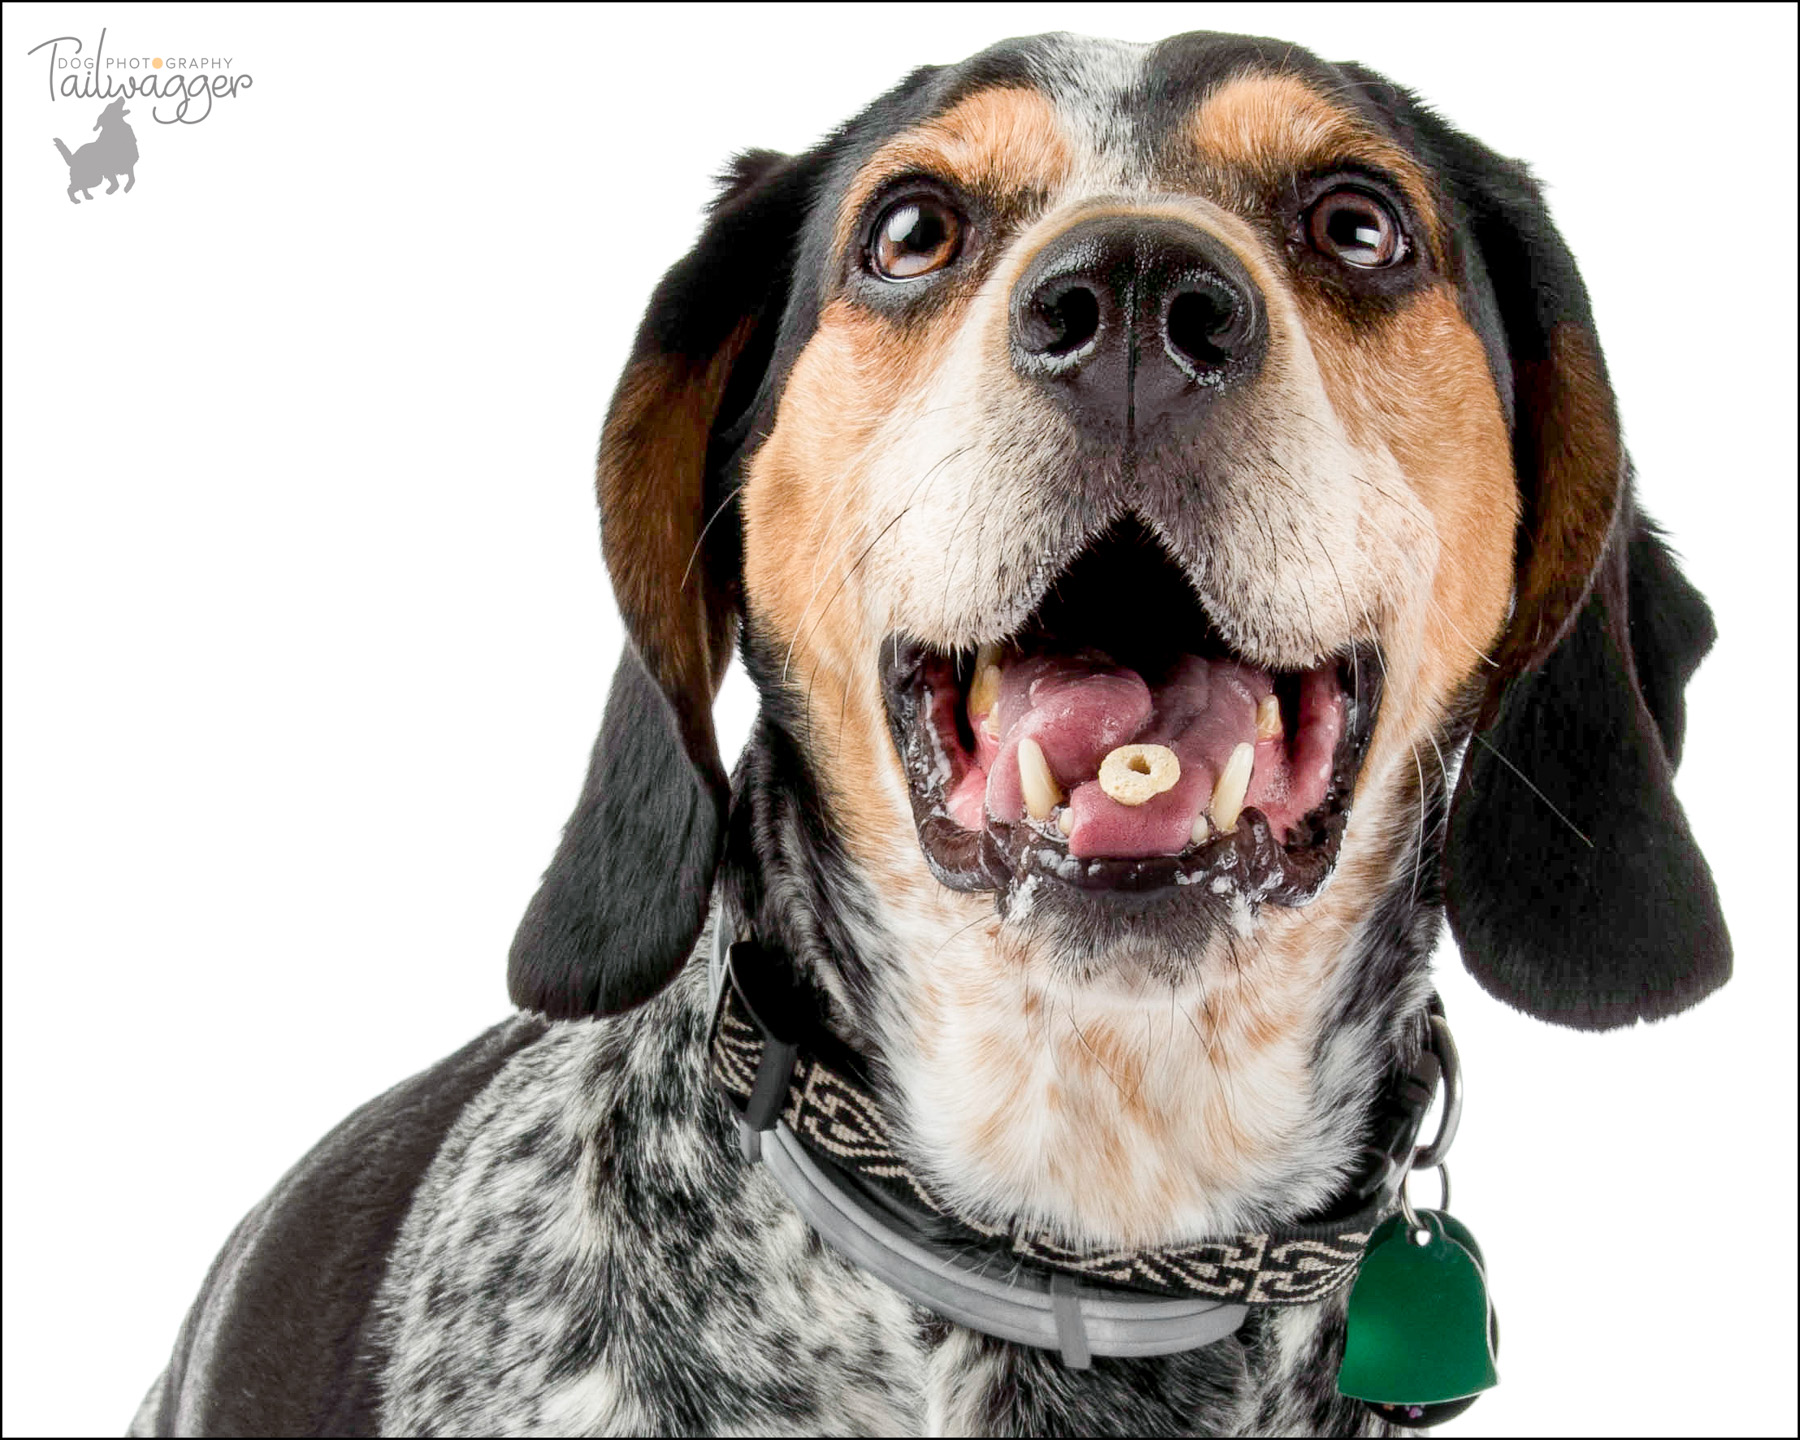 Blue tick hound with a cheerio on his tongue, studio photograph.